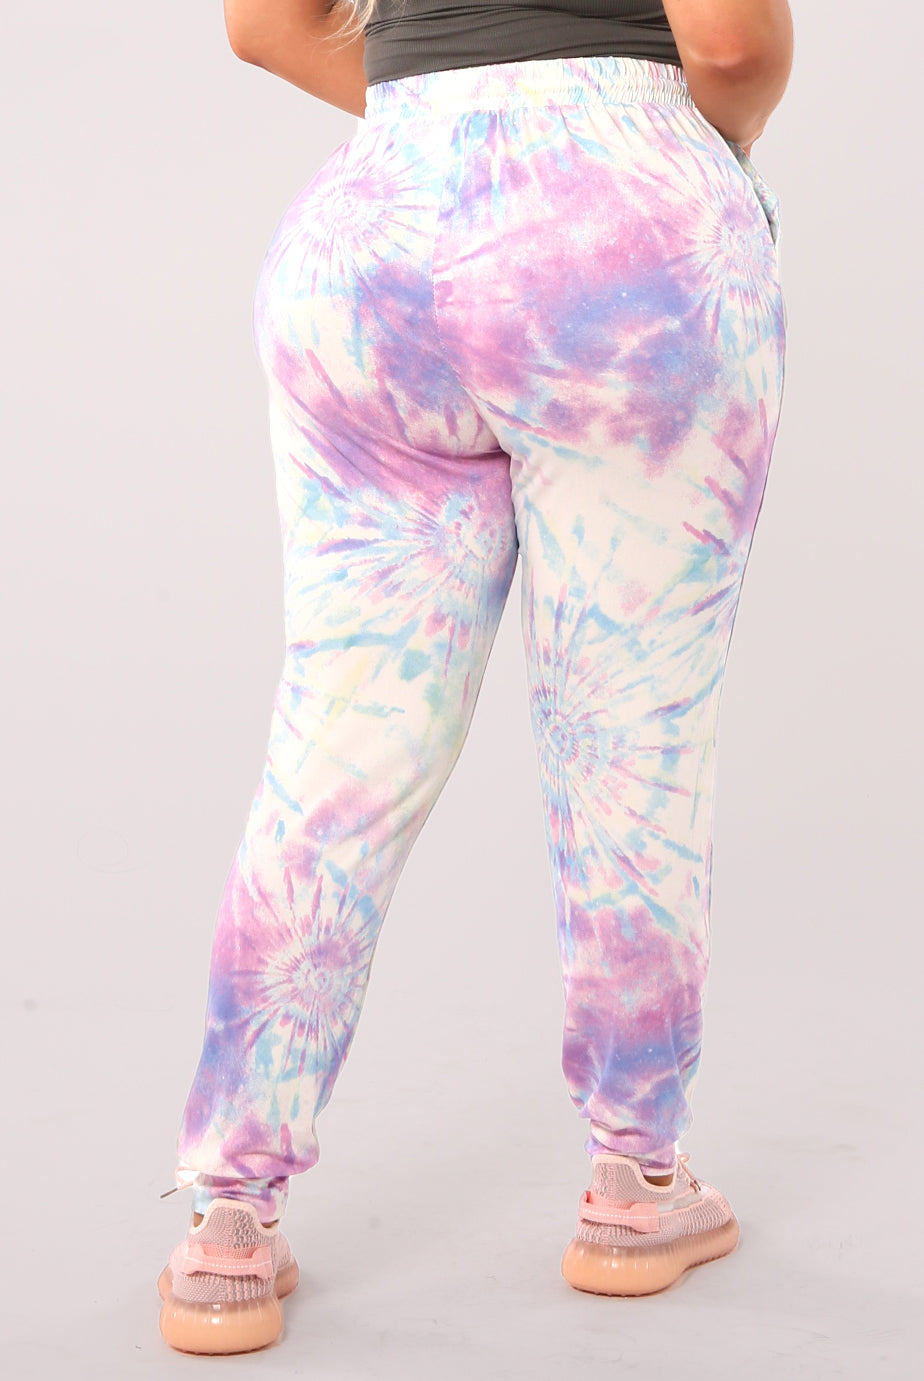 Plus Size Soft Brushed Joggers With Shoe Lace Tie - White, Pink, Blue Tie Dye - S&G Apparel